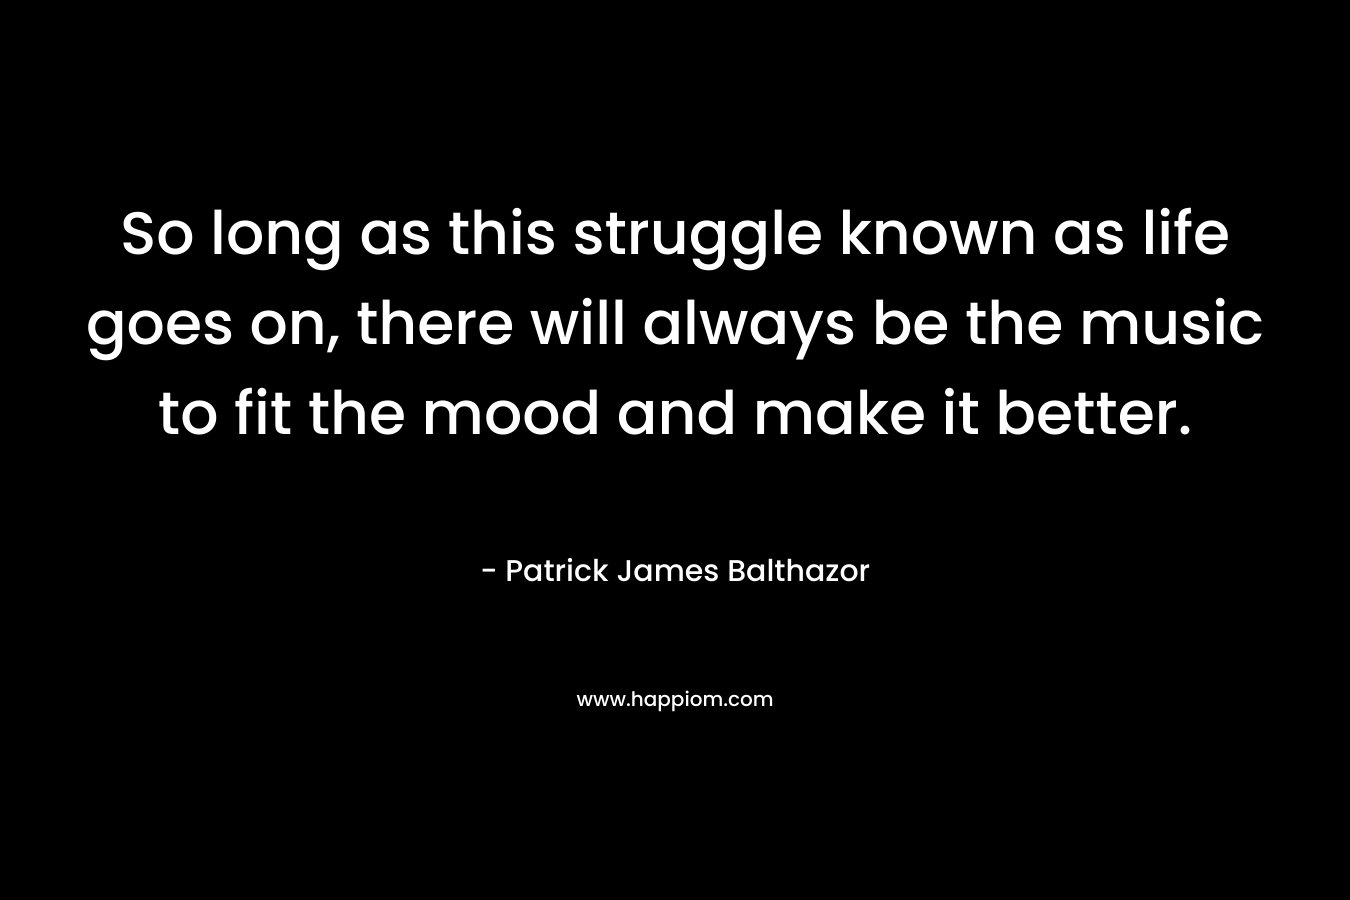 So long as this struggle known as life goes on, there will always be the music to fit the mood and make it better. – Patrick James Balthazor